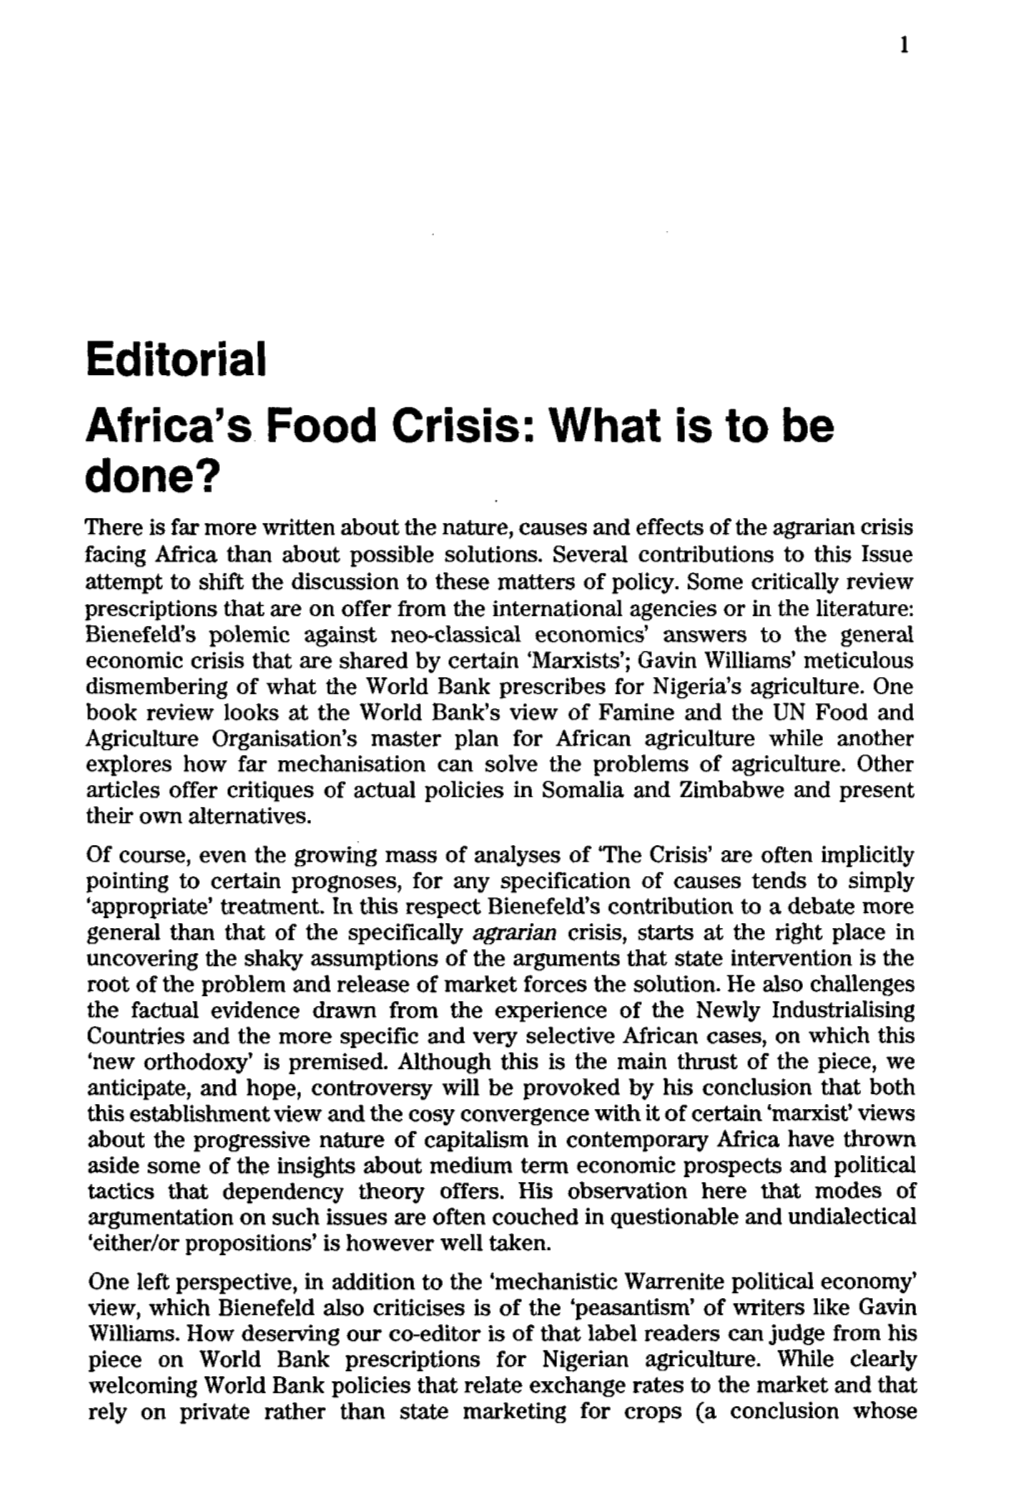 Editorial Africa's Food Crisis: What Is to Be Done?